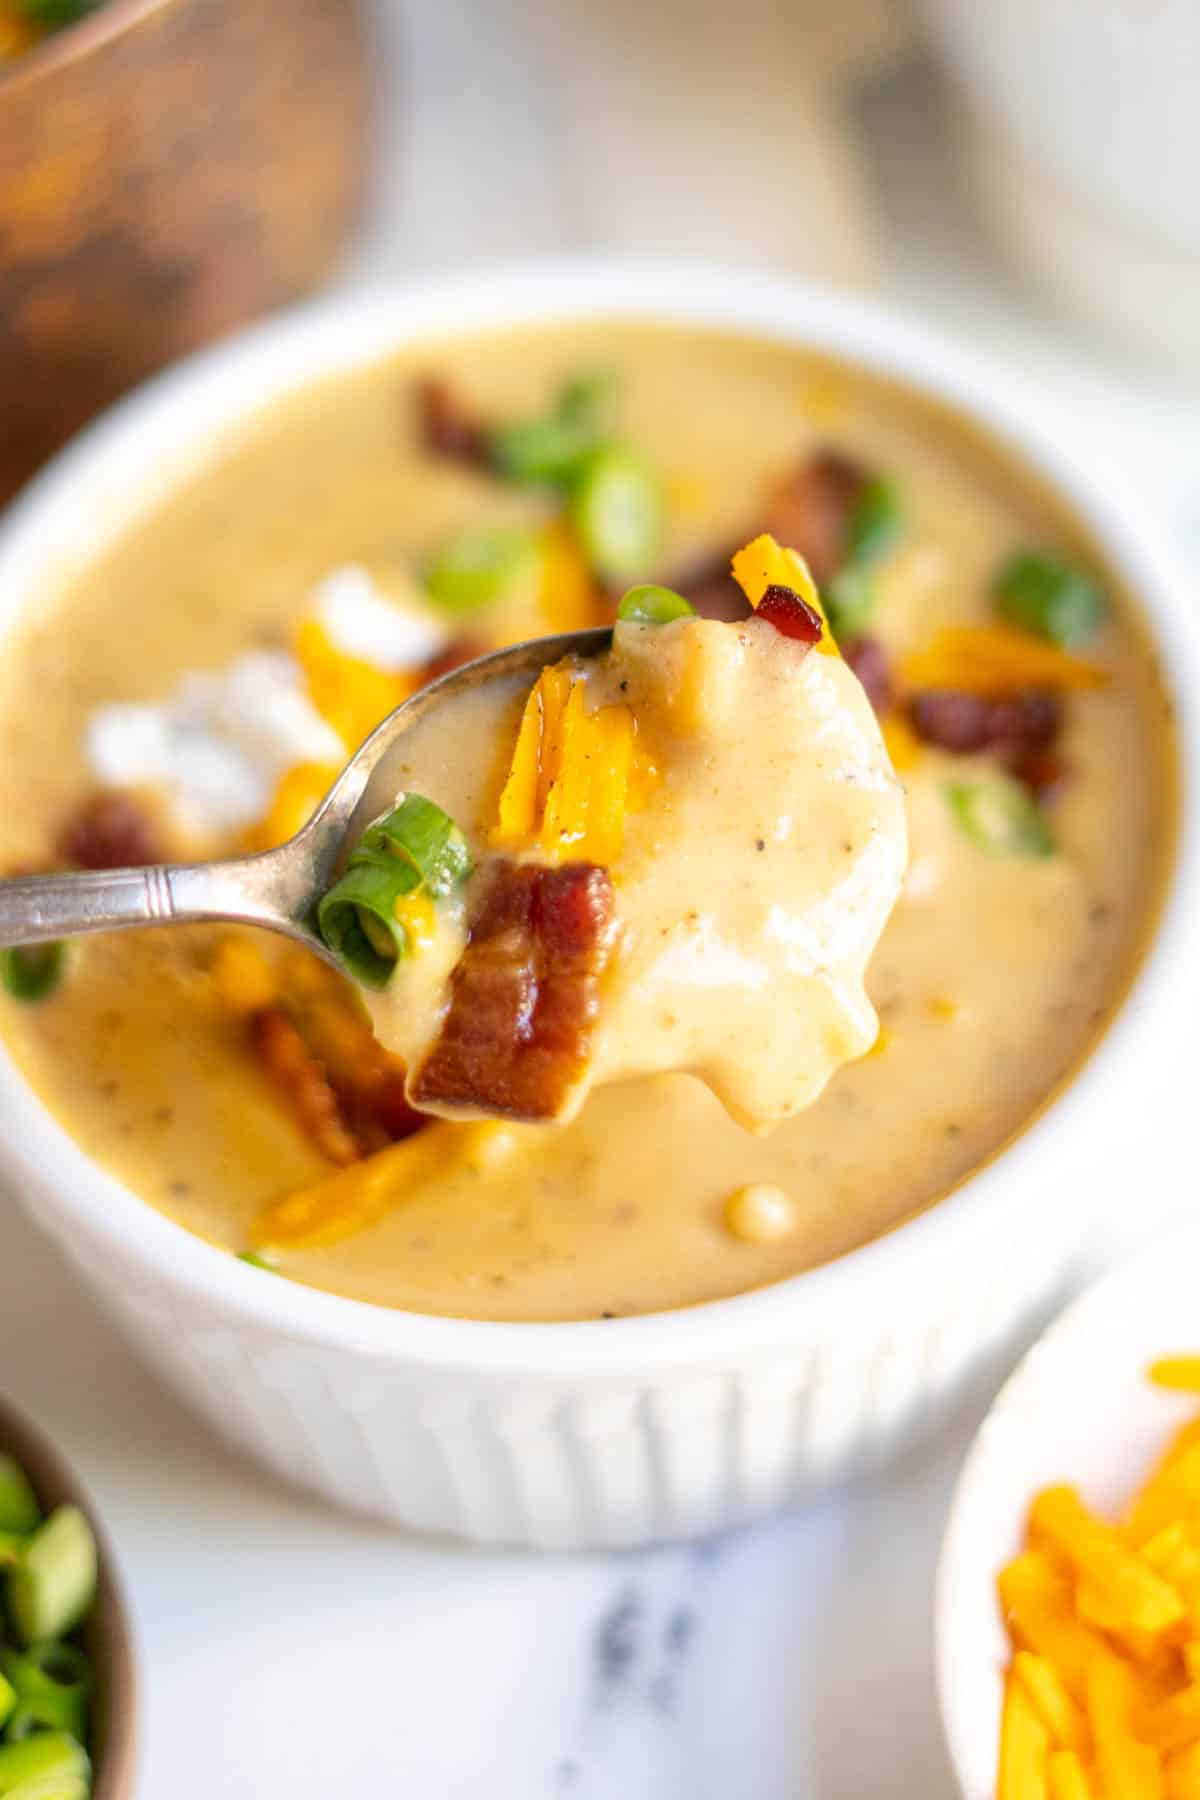 Spooning out creamy potato soup.